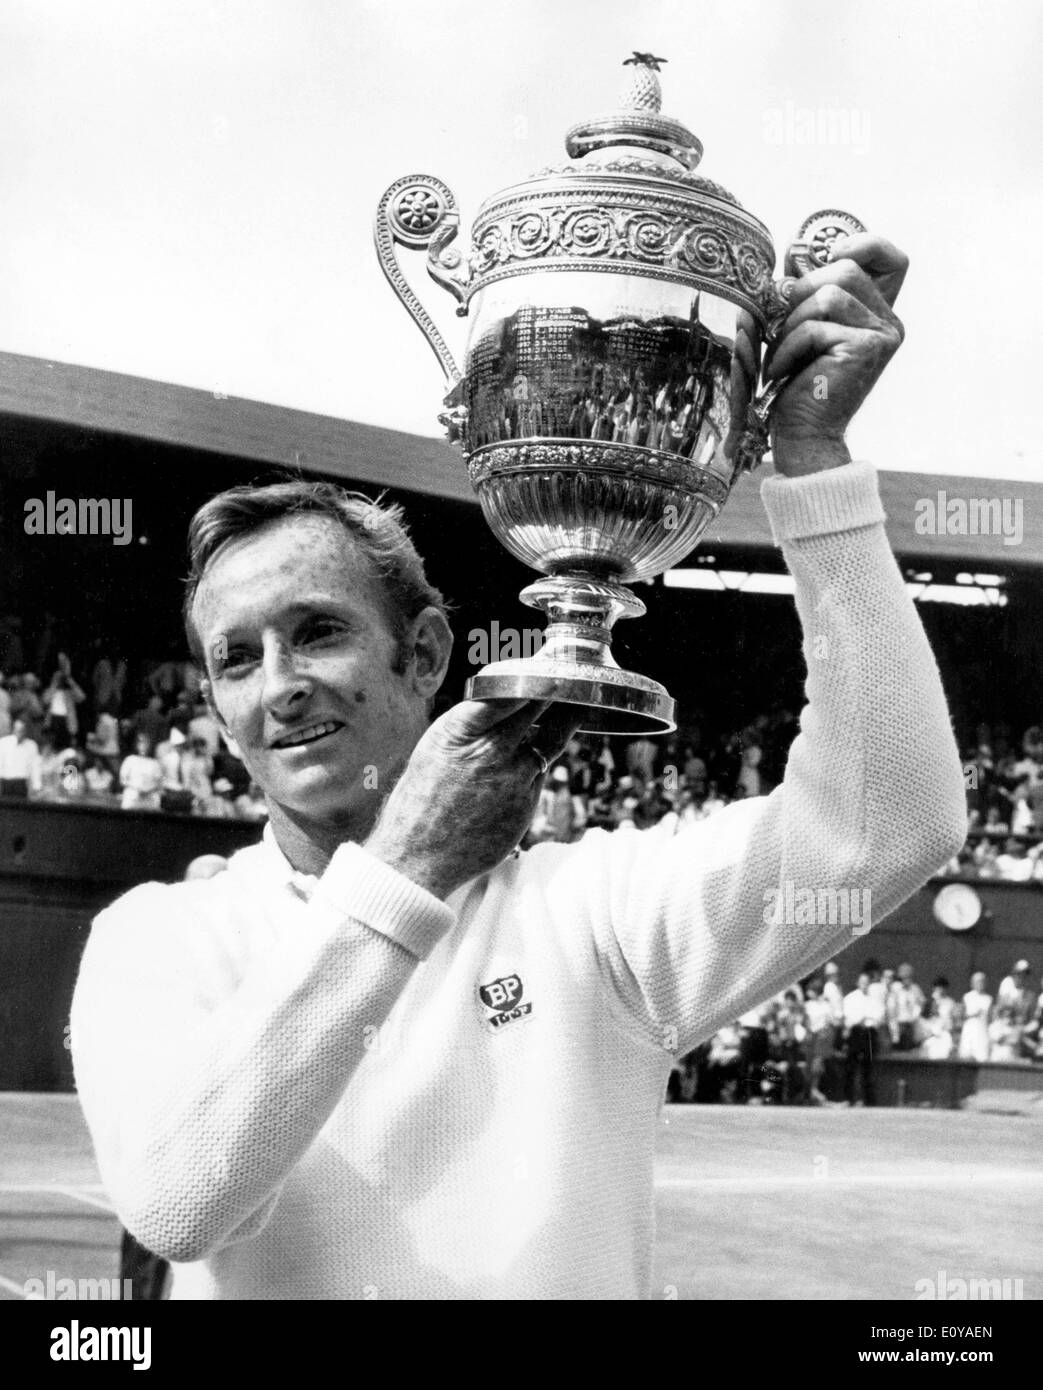 Jul 05, 1969; Wimbledon, UK; In the mens singles final at Wimbledon this afternoon, ROD LAVER from Australia, beat Australian John Newcombe, 6-4, 5-7, 6-4 and 6-4. The picture shows Rod Laver held high the trophy after winning the mens singles final at Wimbledon today for the fourth time. Stock Photo